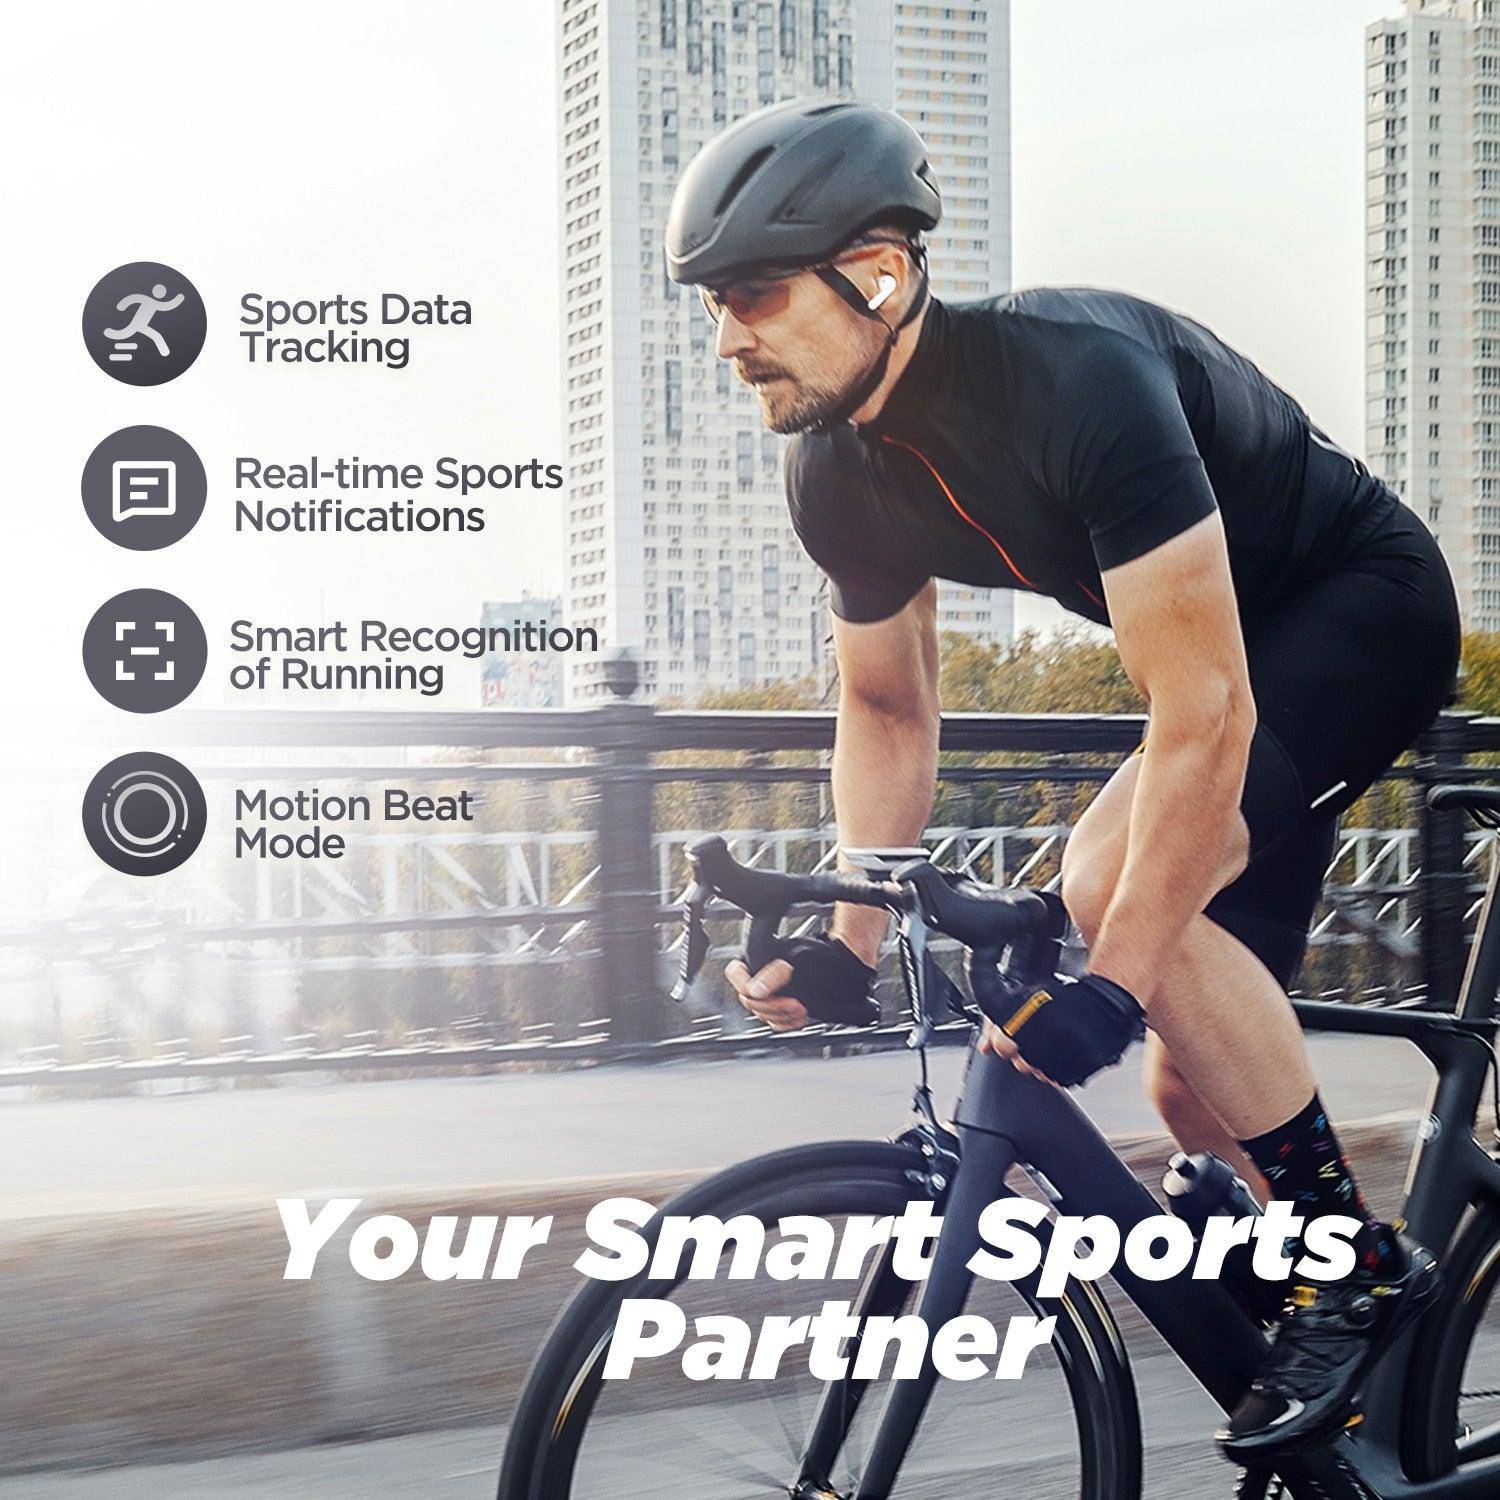 Amazfit PowerBuds Pro Sports Earphones - Heart Rate Monitoring & Fitness